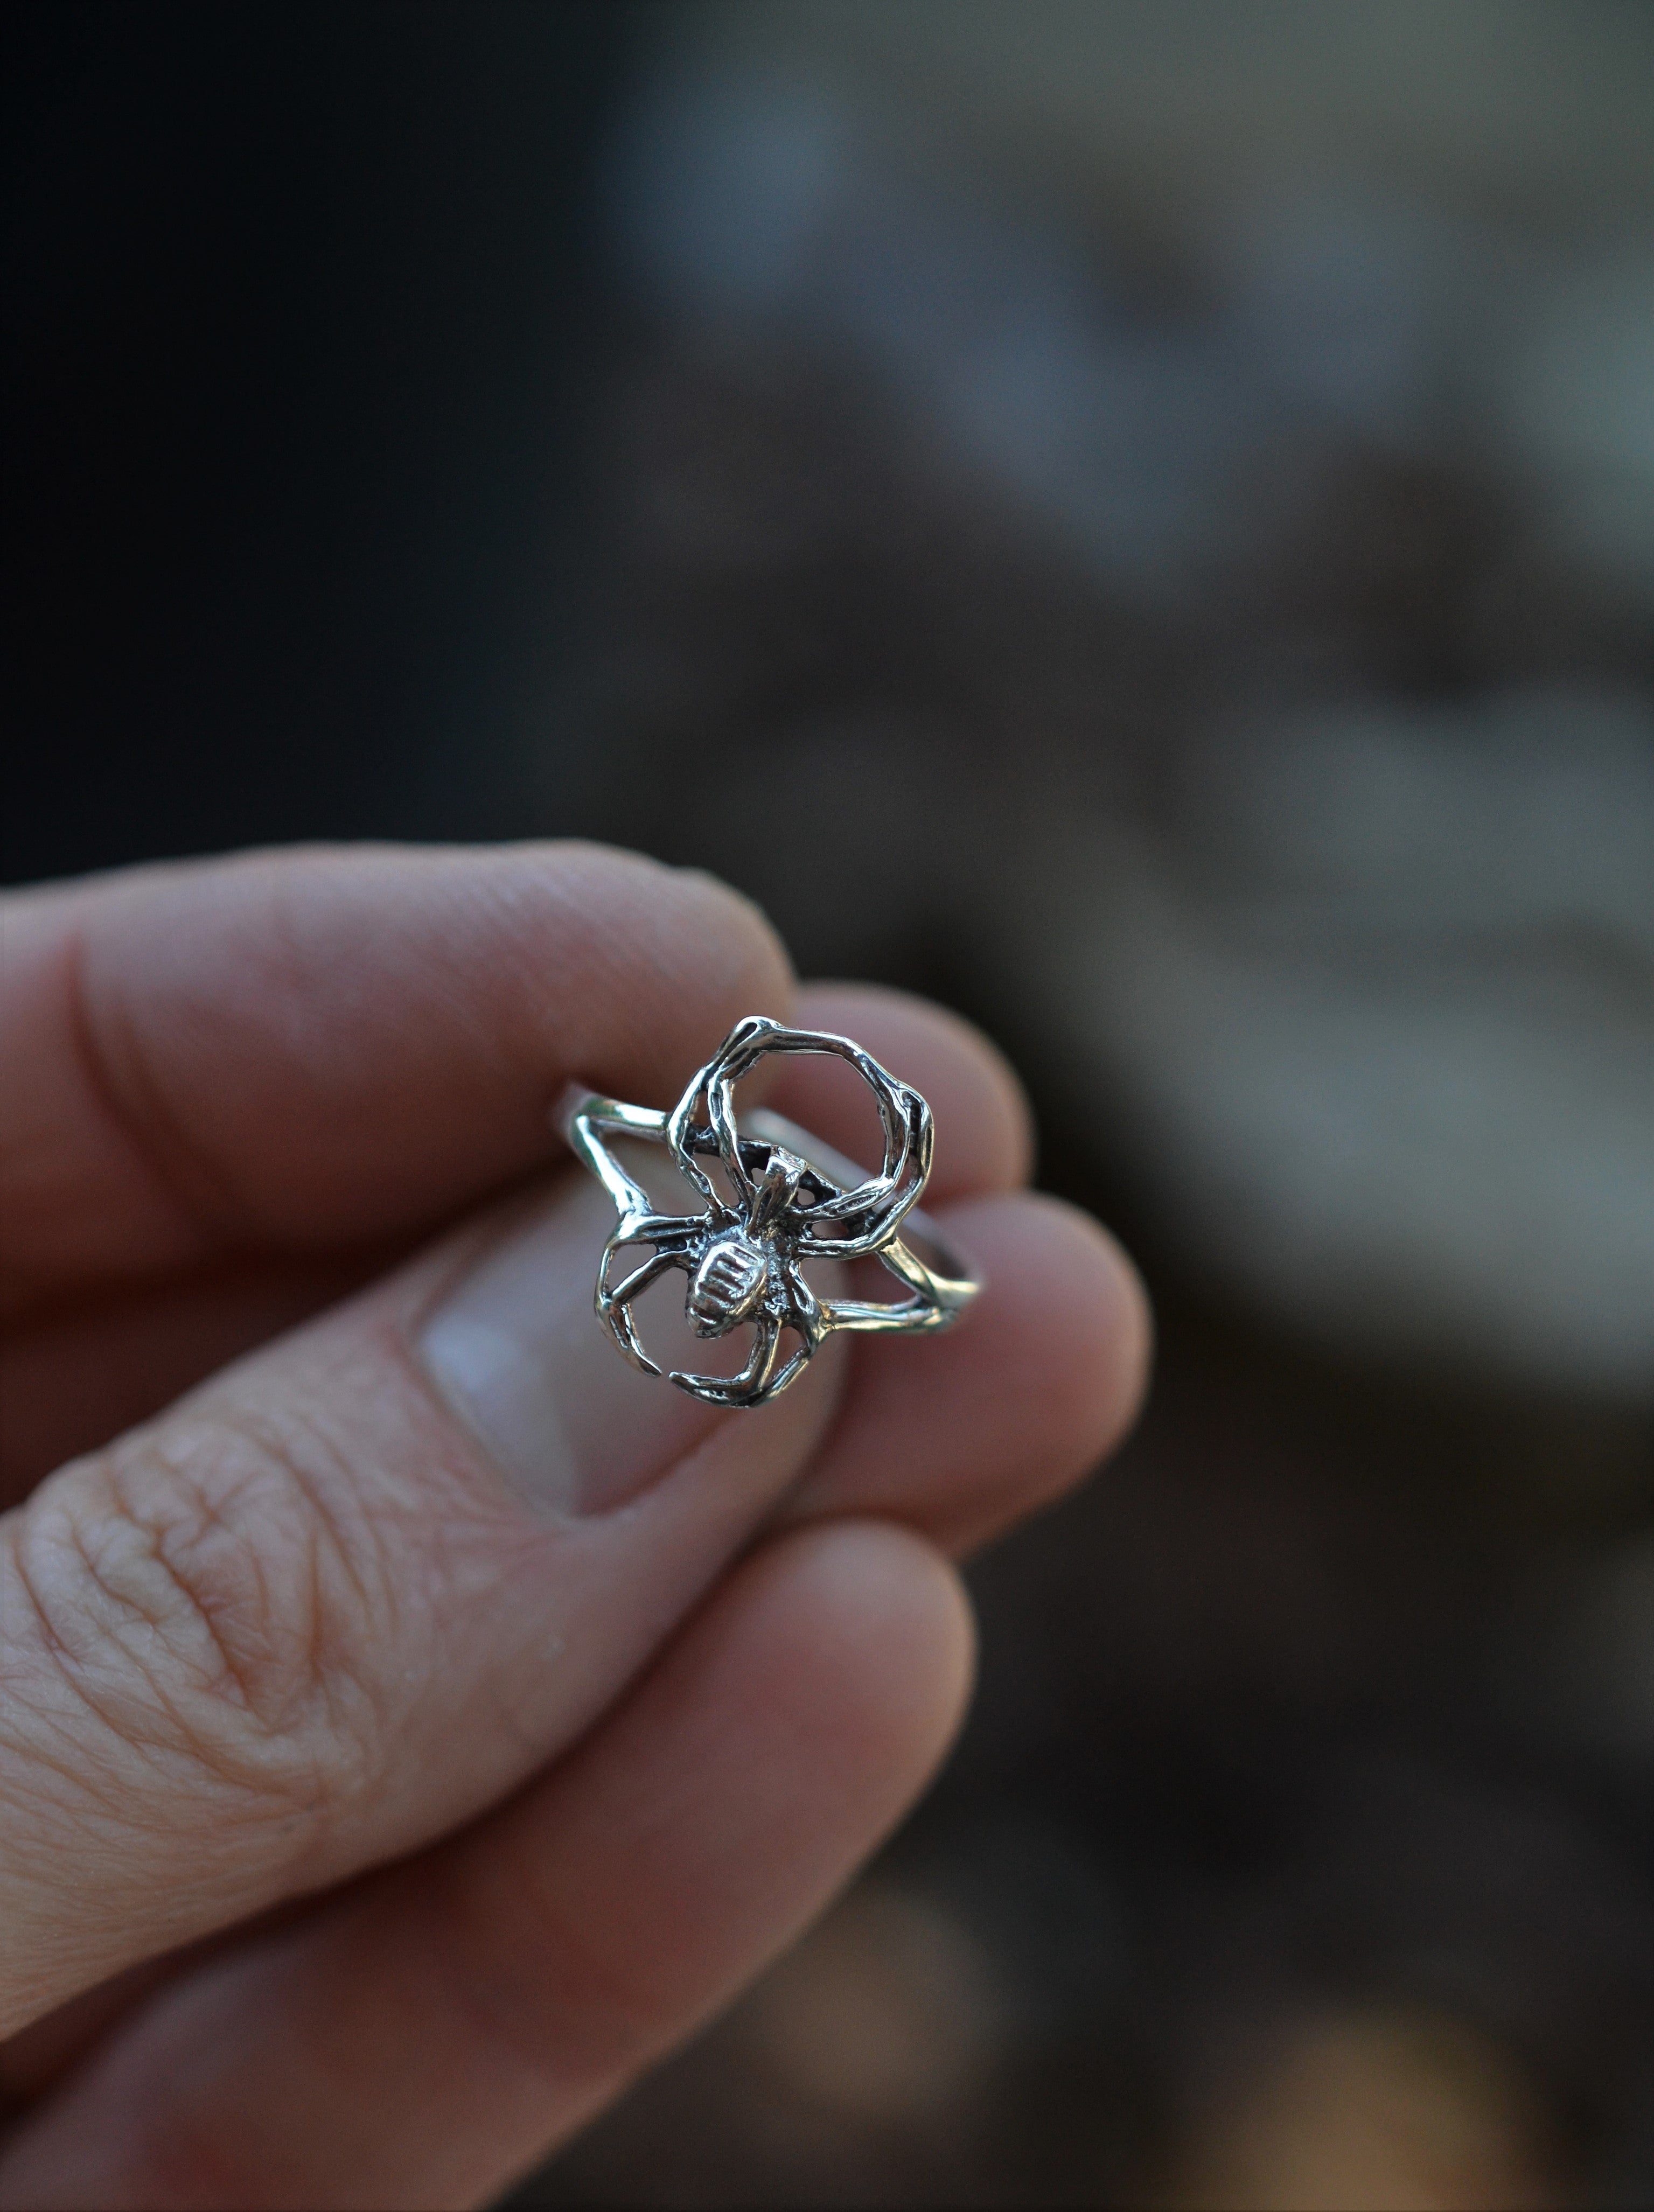 Only 3 Left! Spider Ring - Slightly Adjustable from 6-10 - Sterling Silver